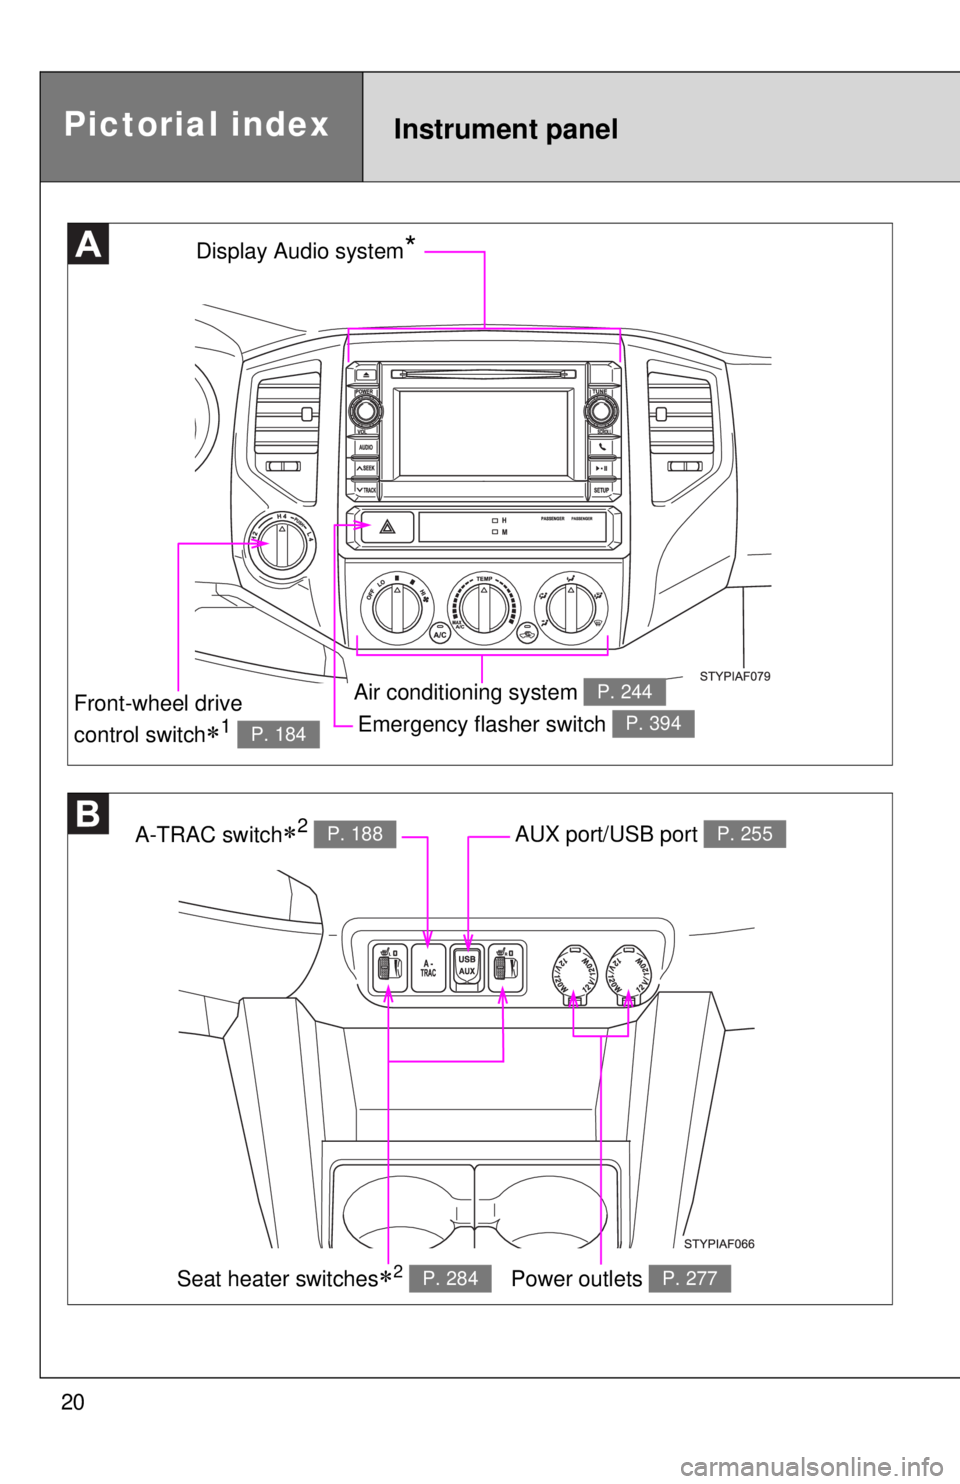 TOYOTA TACOMA 2013  Owners Manual (in English) 20
Emergency flasher switch P. 394
Display Audio system*
Air conditioning system P. 244
A-TRAC switch2 P. 188AUX port/USB port P. 255
Power outlets P. 277
Front-wheel drive 
control switch
1 P. 